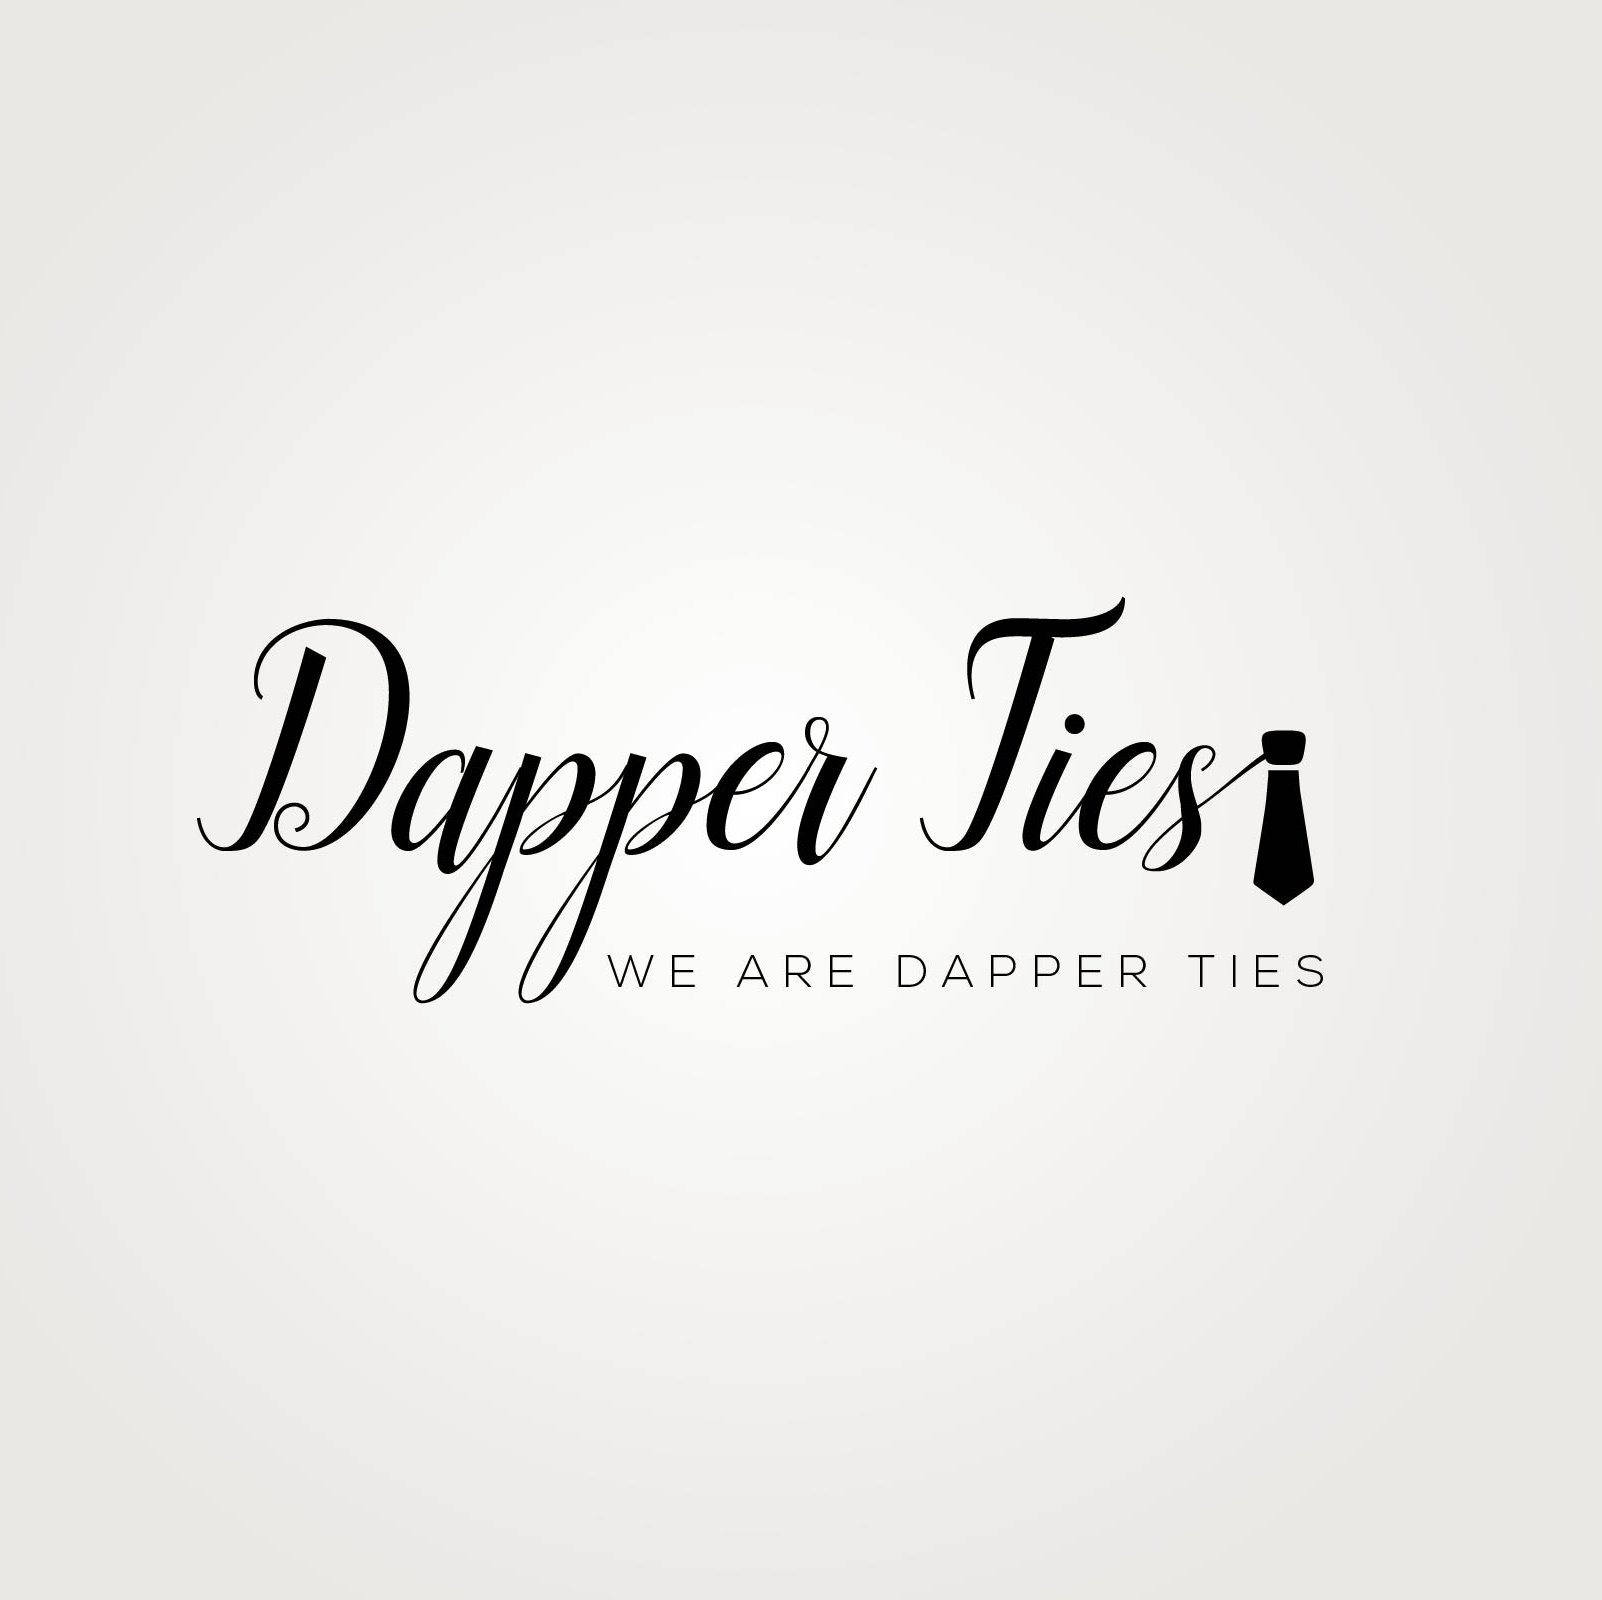 We Are Dapper Ties is a company created by brothers Andrew and Julian who believe that feeling and looking great should be an affordable right for all.